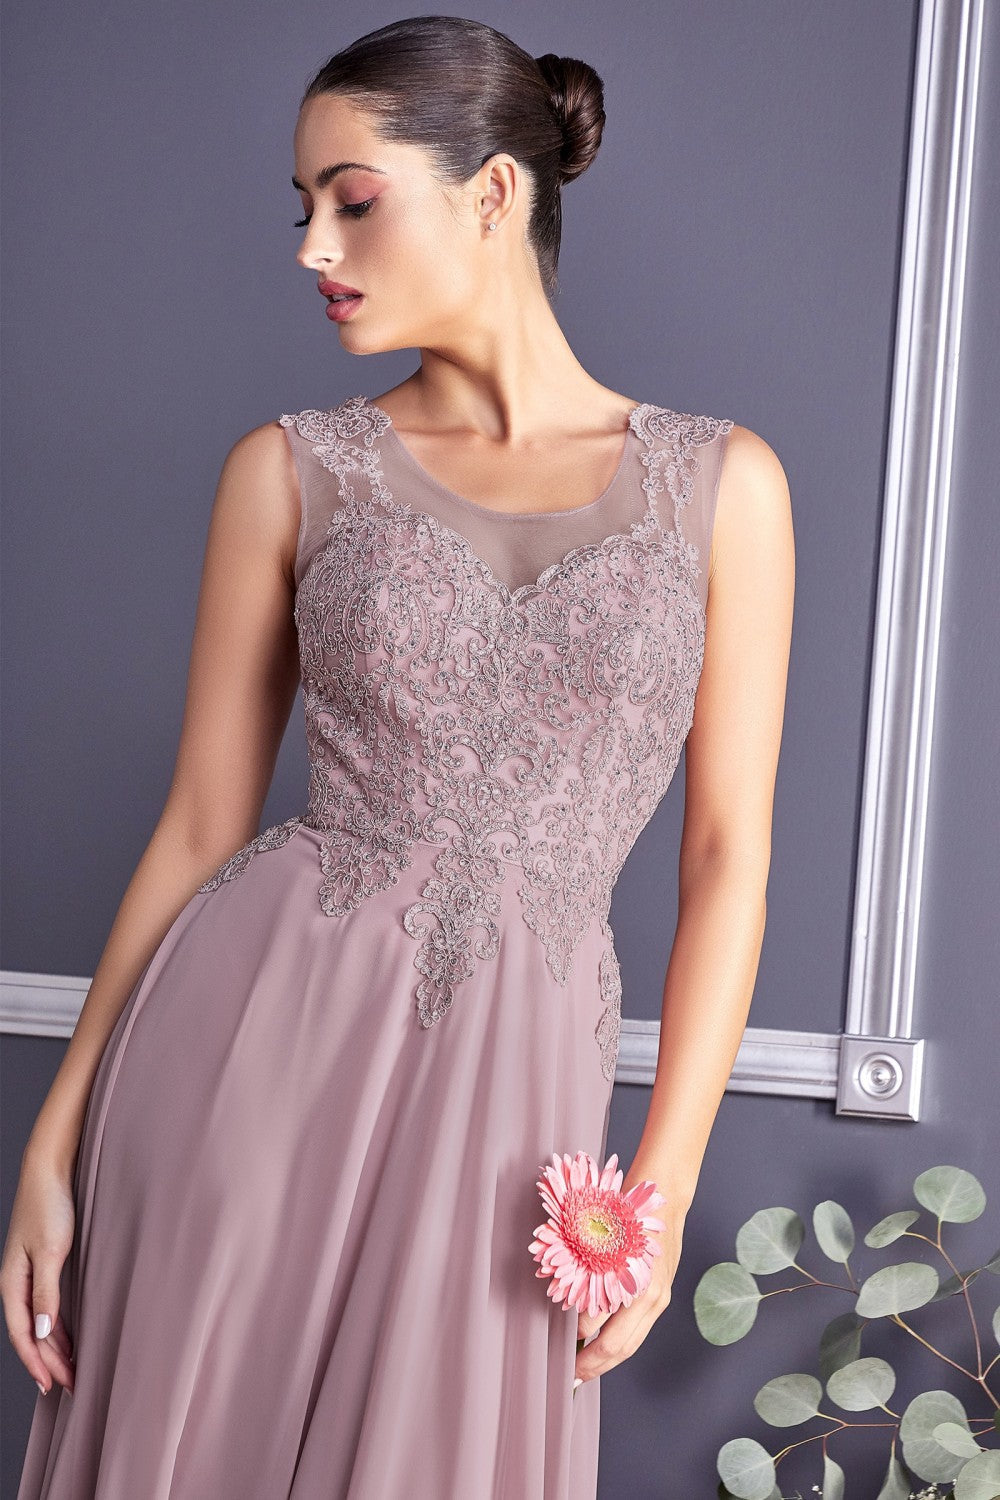 A-line Chiffon Prom & Ball Gown Embellished Illusion Sweetheart Bodice Floor Length Vintage Princess Skirt Bridesmaid Style CD2635 Elsy Style Bridesmaid Dress